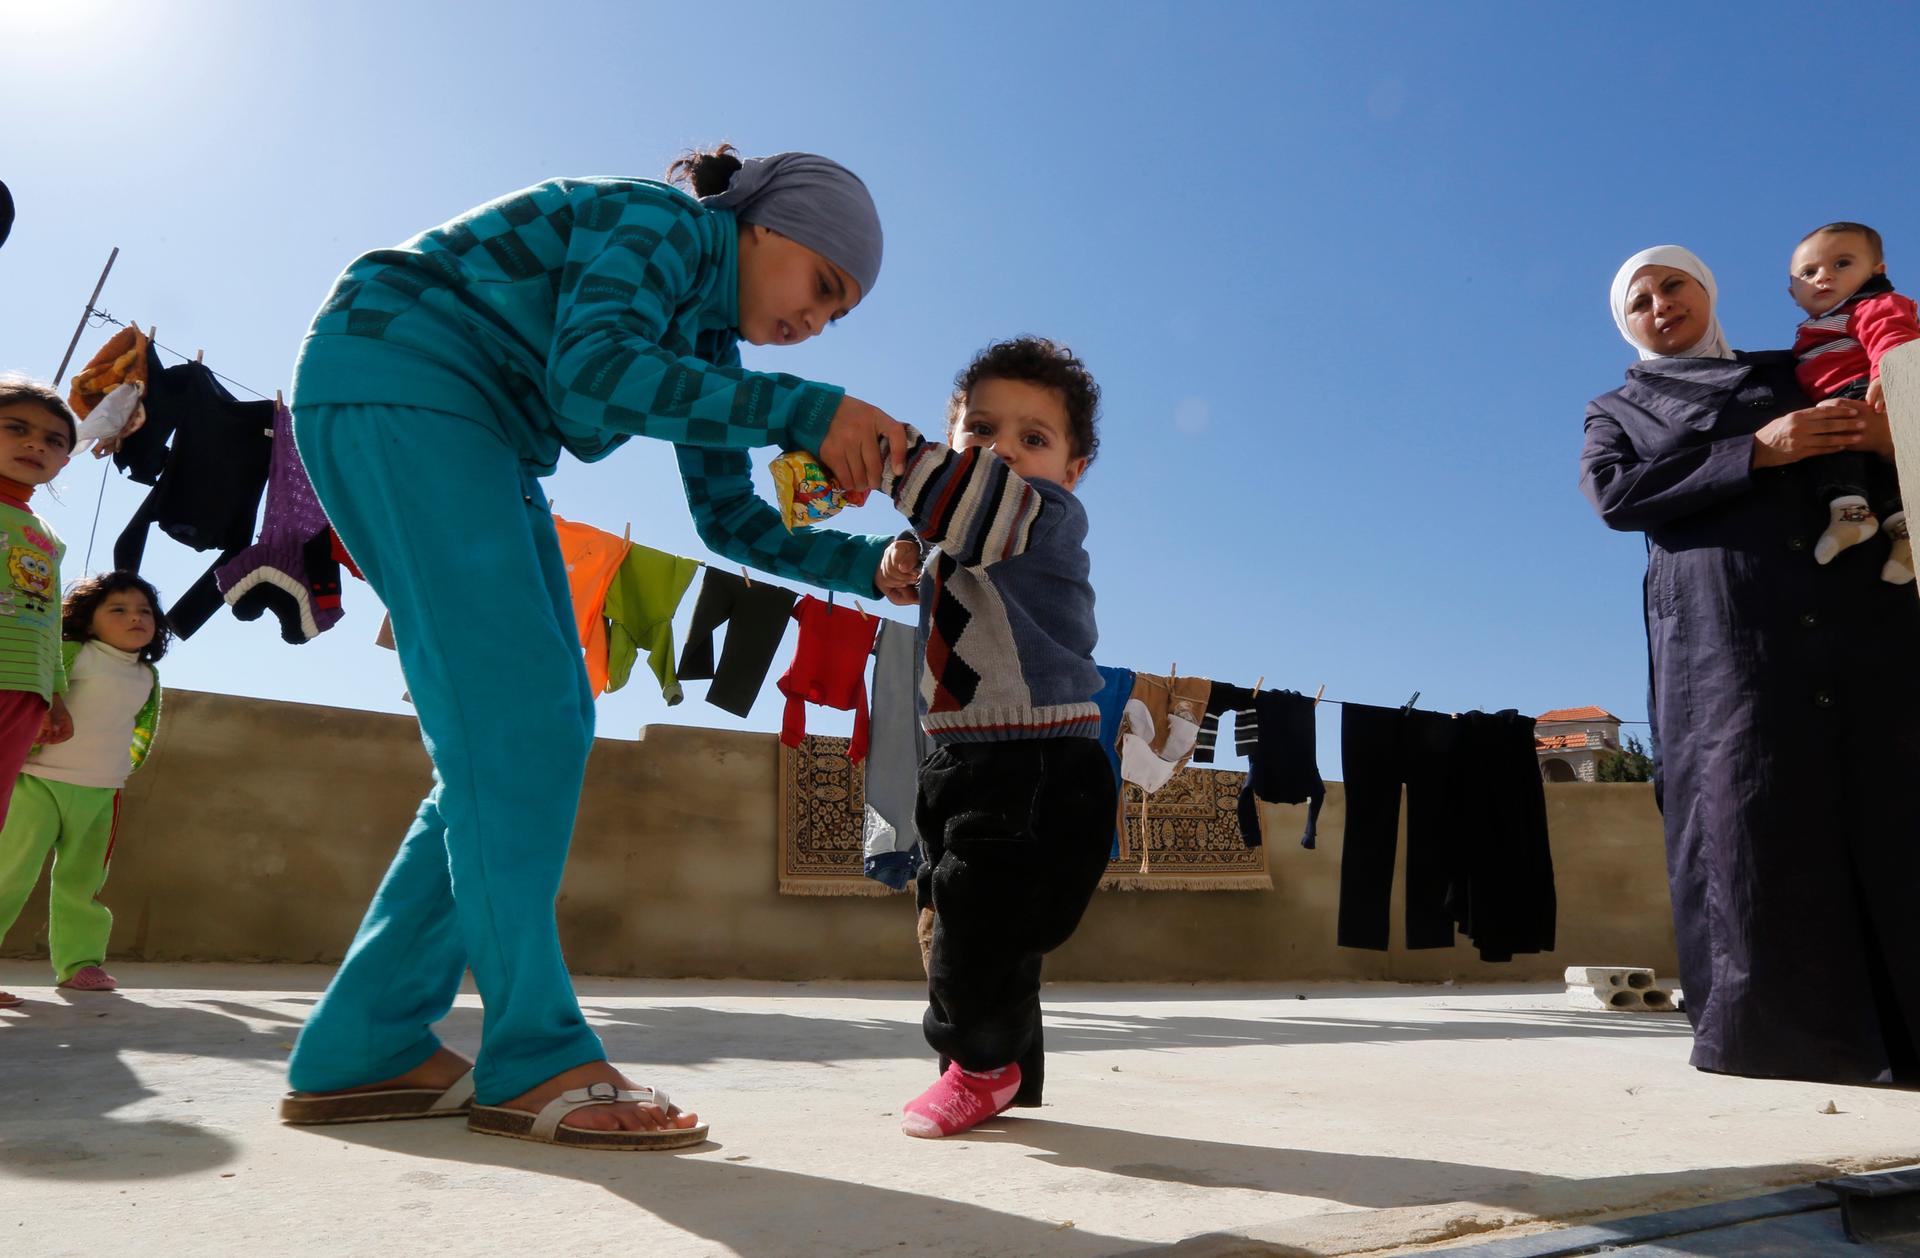 A Syrian refugee girl helps her brother walk